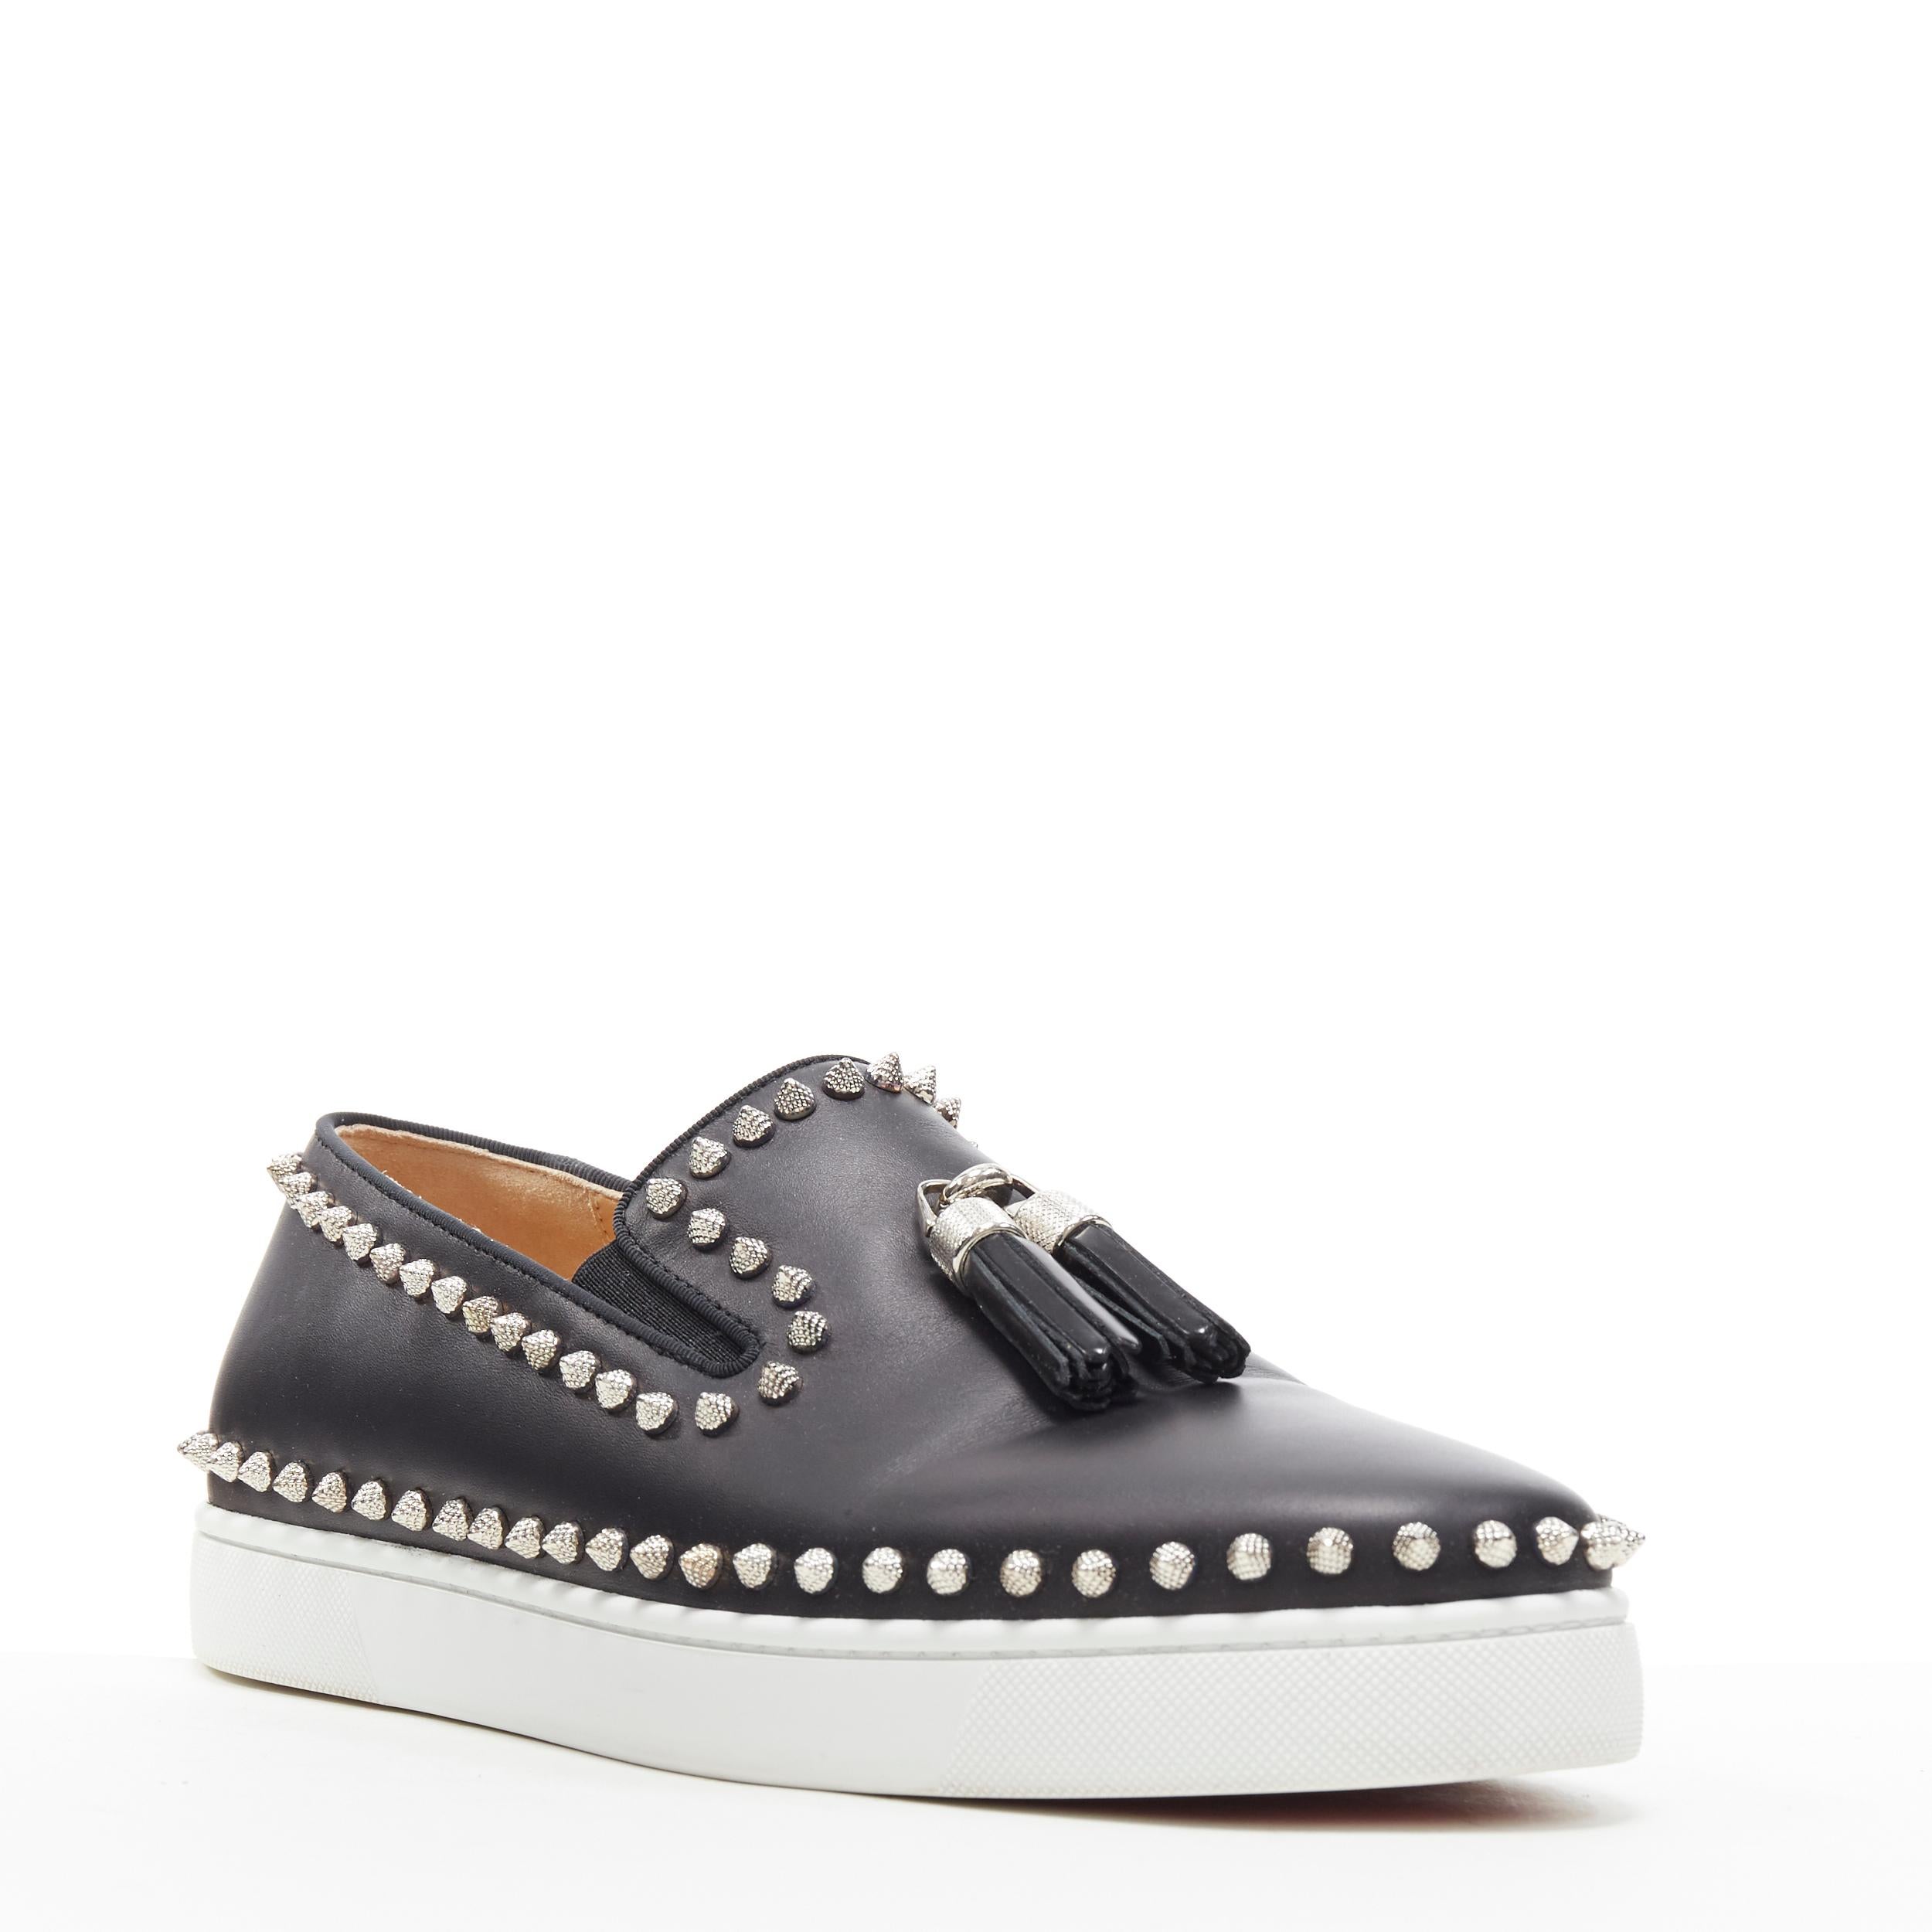 CHRISTIAN LOUBOUTIN black leather silver spike stud tassel skate sneaker EU41.5
Brand: Christian Louboutin
Designer: Christian Louboutin
Model Name / Style: Low top sneaker
Material: Leather
Color: Black
Pattern: Solid
Closure: Slip on
Extra Detail: